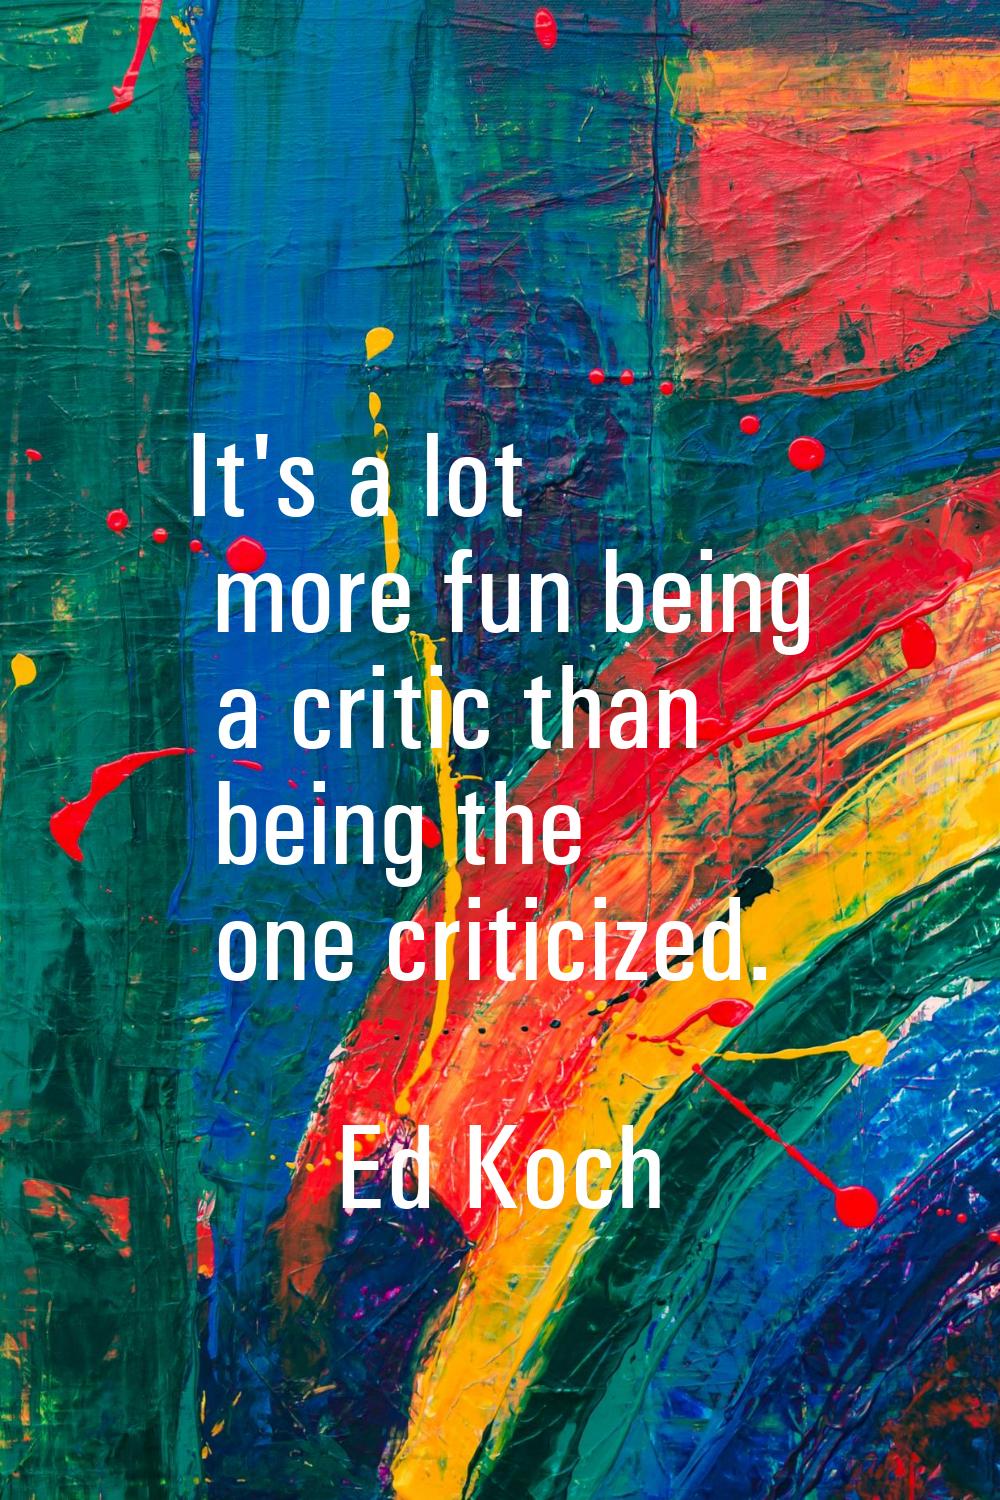 It's a lot more fun being a critic than being the one criticized.